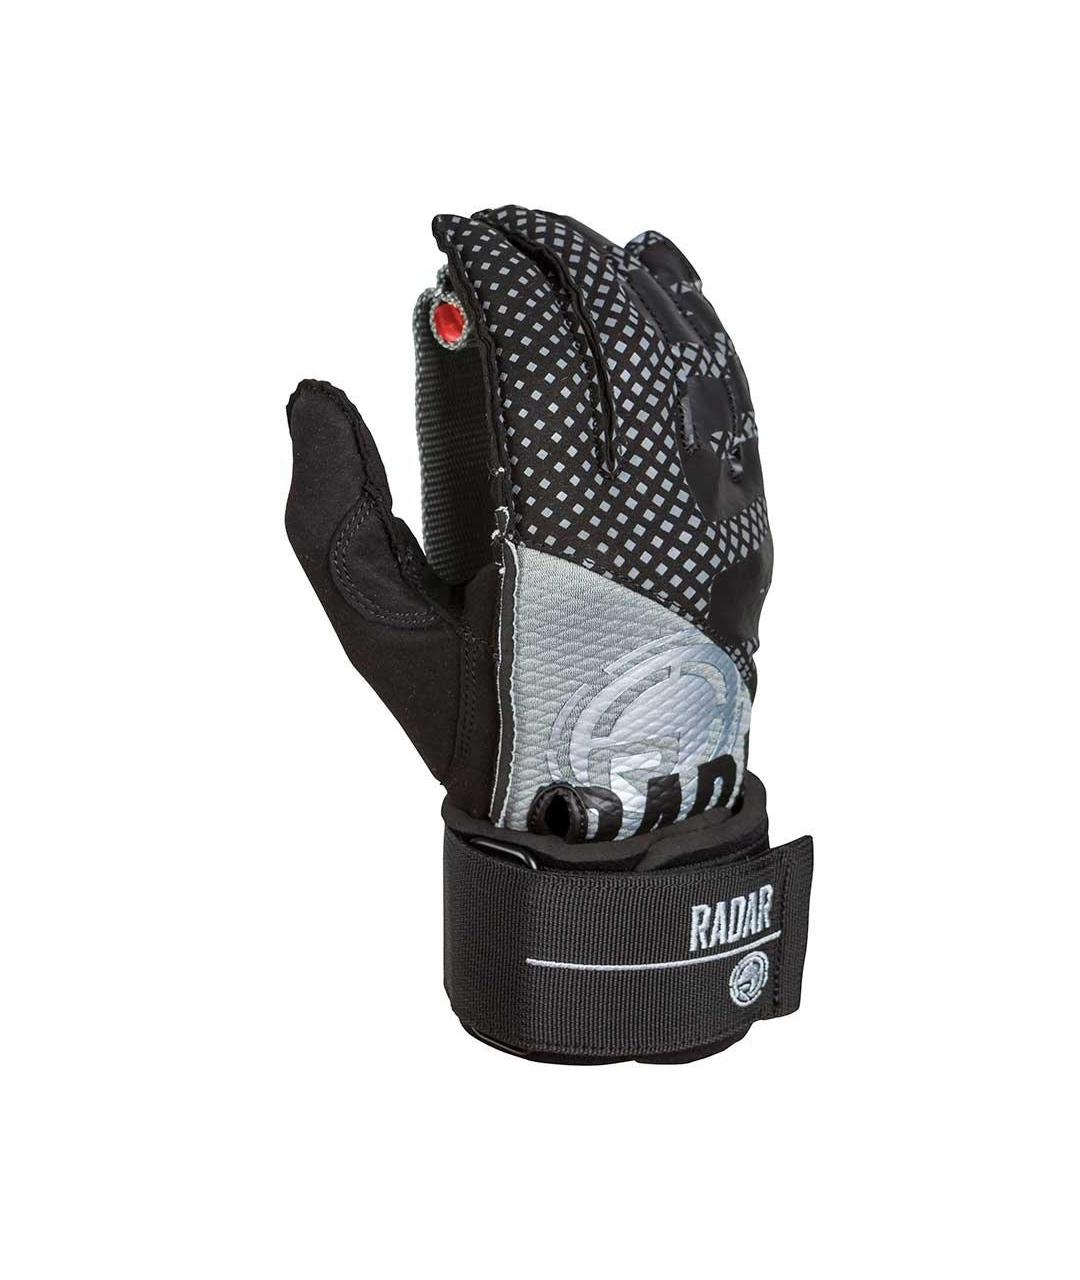 Vice Inside out Glove Black/Silver